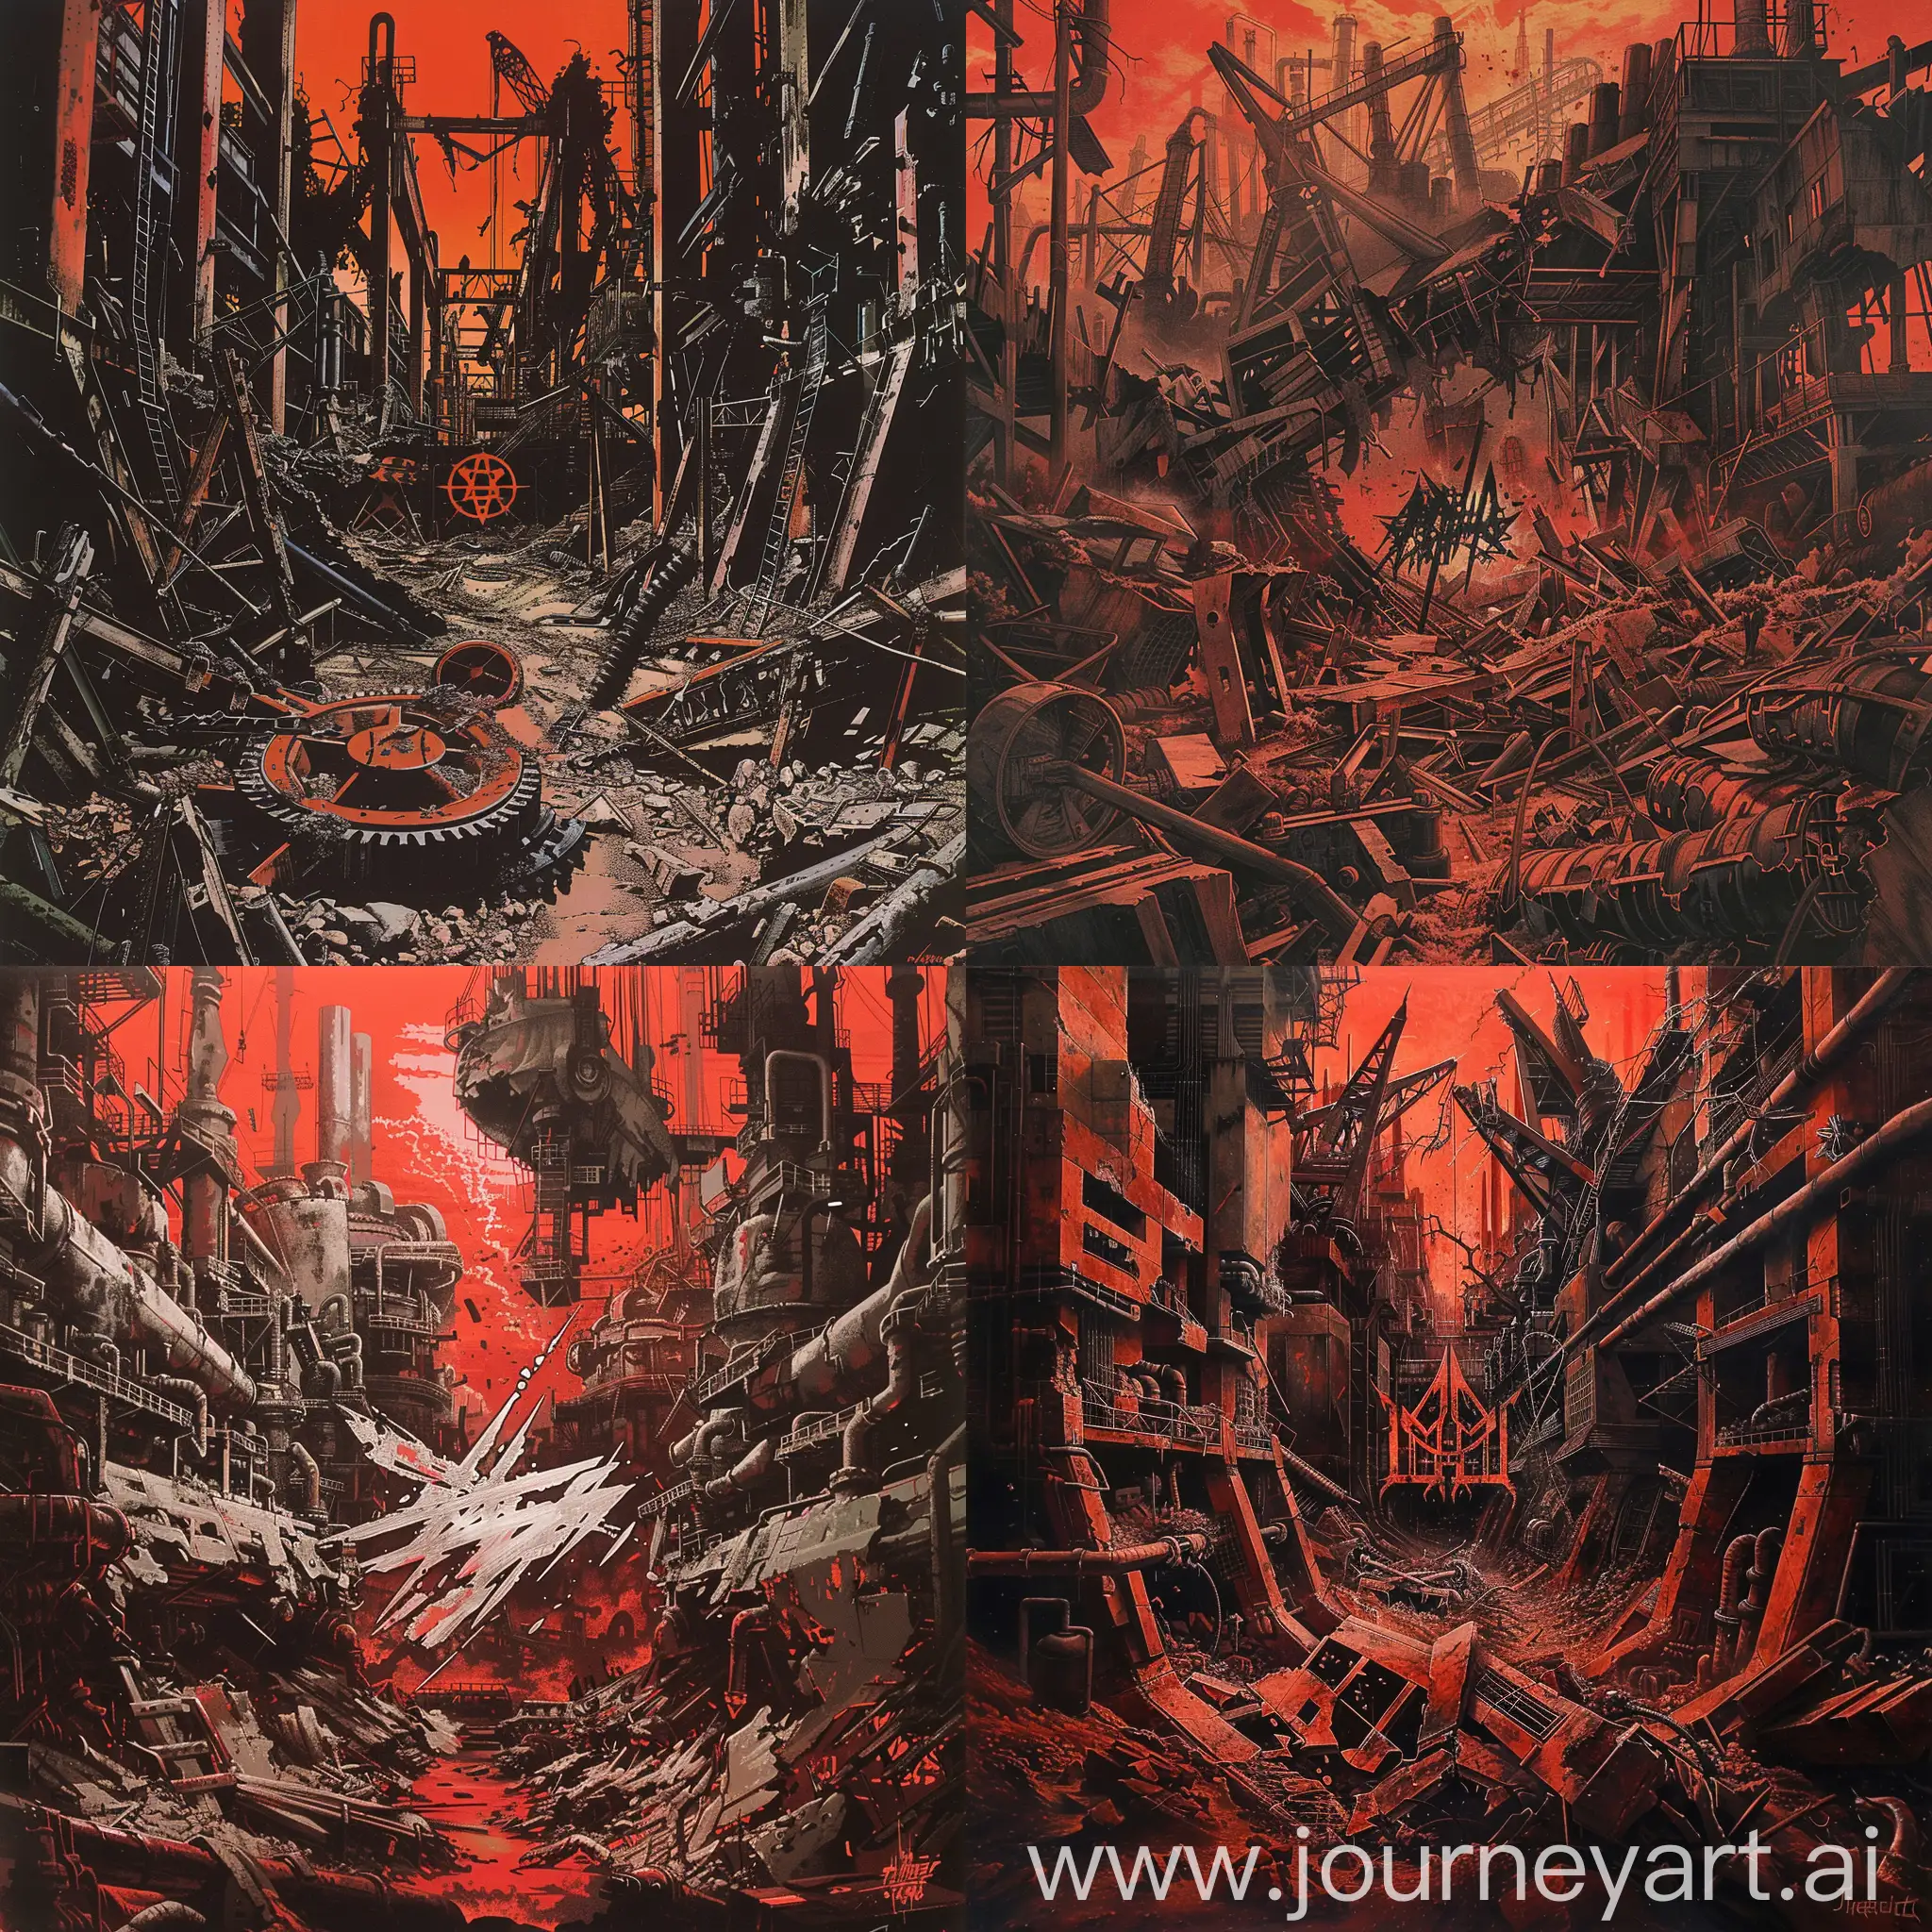 The album cover is an image that shows destroyed mechanical structures, similar to factory premises or factories. In the center of the cover is the band's logo, made in the style of American thrash metal of the 90s. The background of the cover is made in bright red, which emphasizes the dynamic and aggressive nature of the album's music.